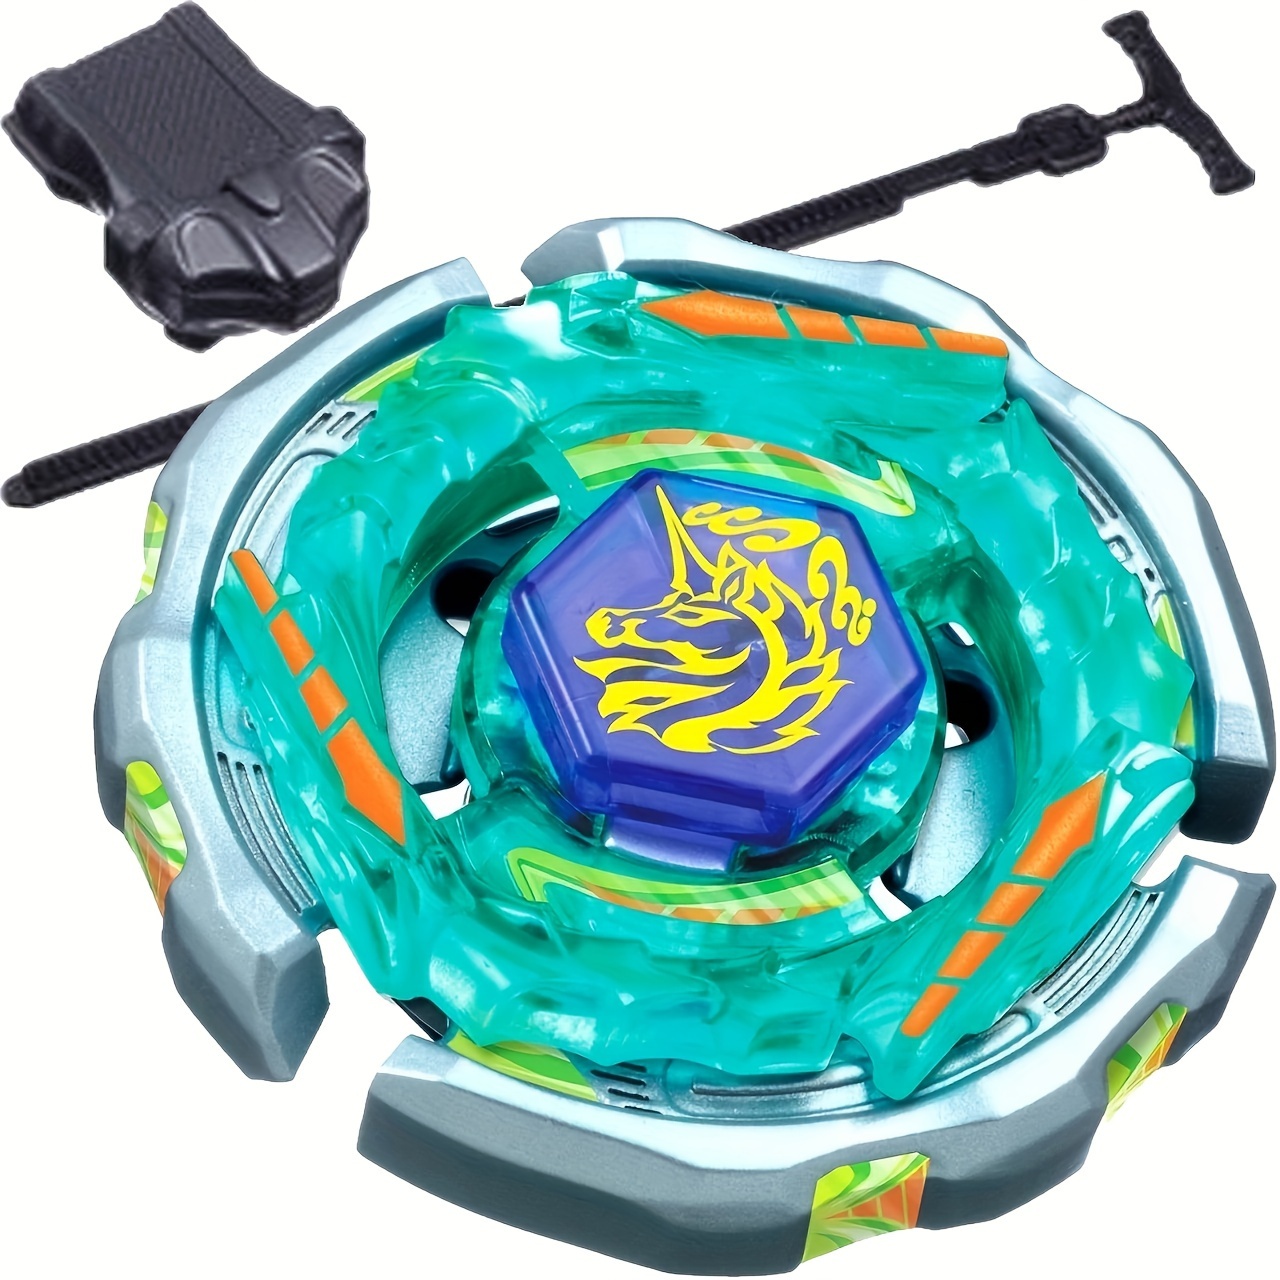 Beyblades Metal Fusion Blay Blade Toys Set 8Pcs Gyro With Wire And Ruler  Launcher Storage Box For Children Halloween，Thanksgiving And Christmas Gift